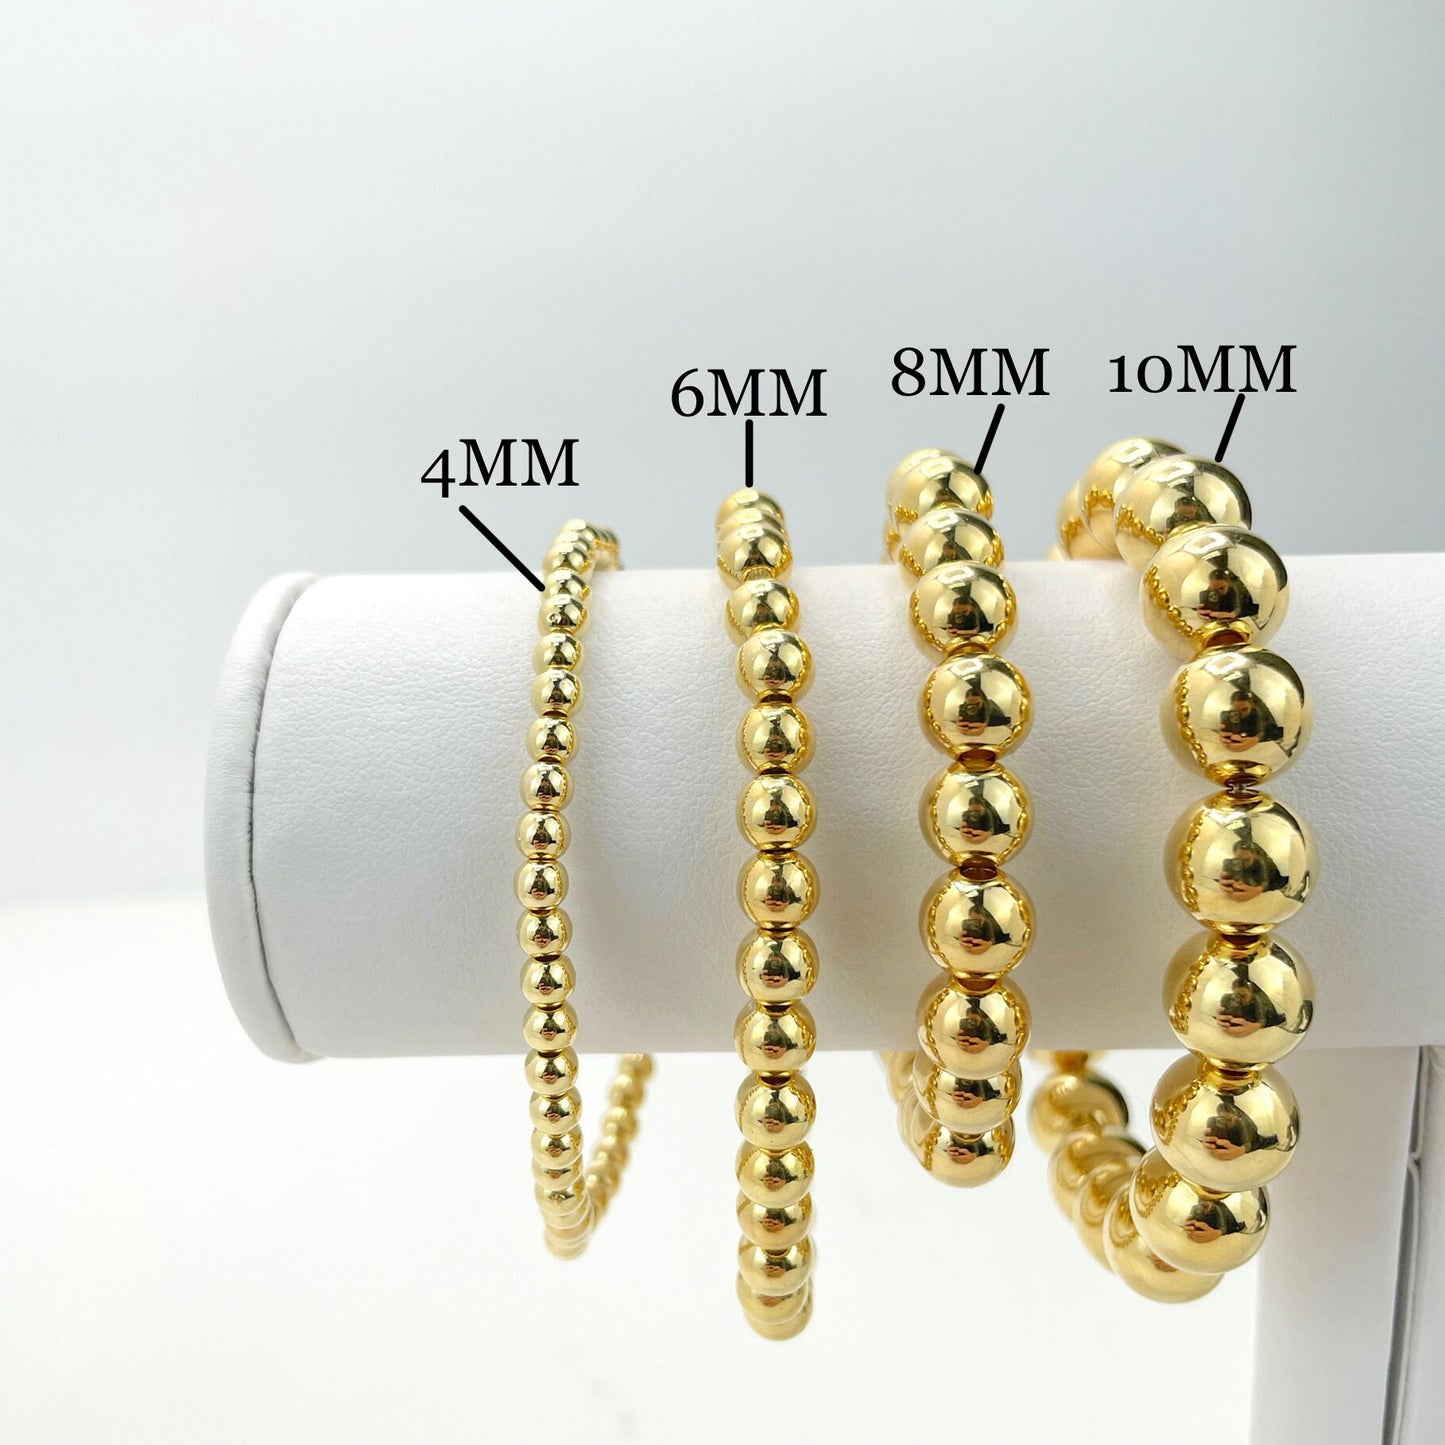 18k Gold Filled Stretch Beads Bracelet Available in 4 sizes For Wholesale and Jewelry Supplies